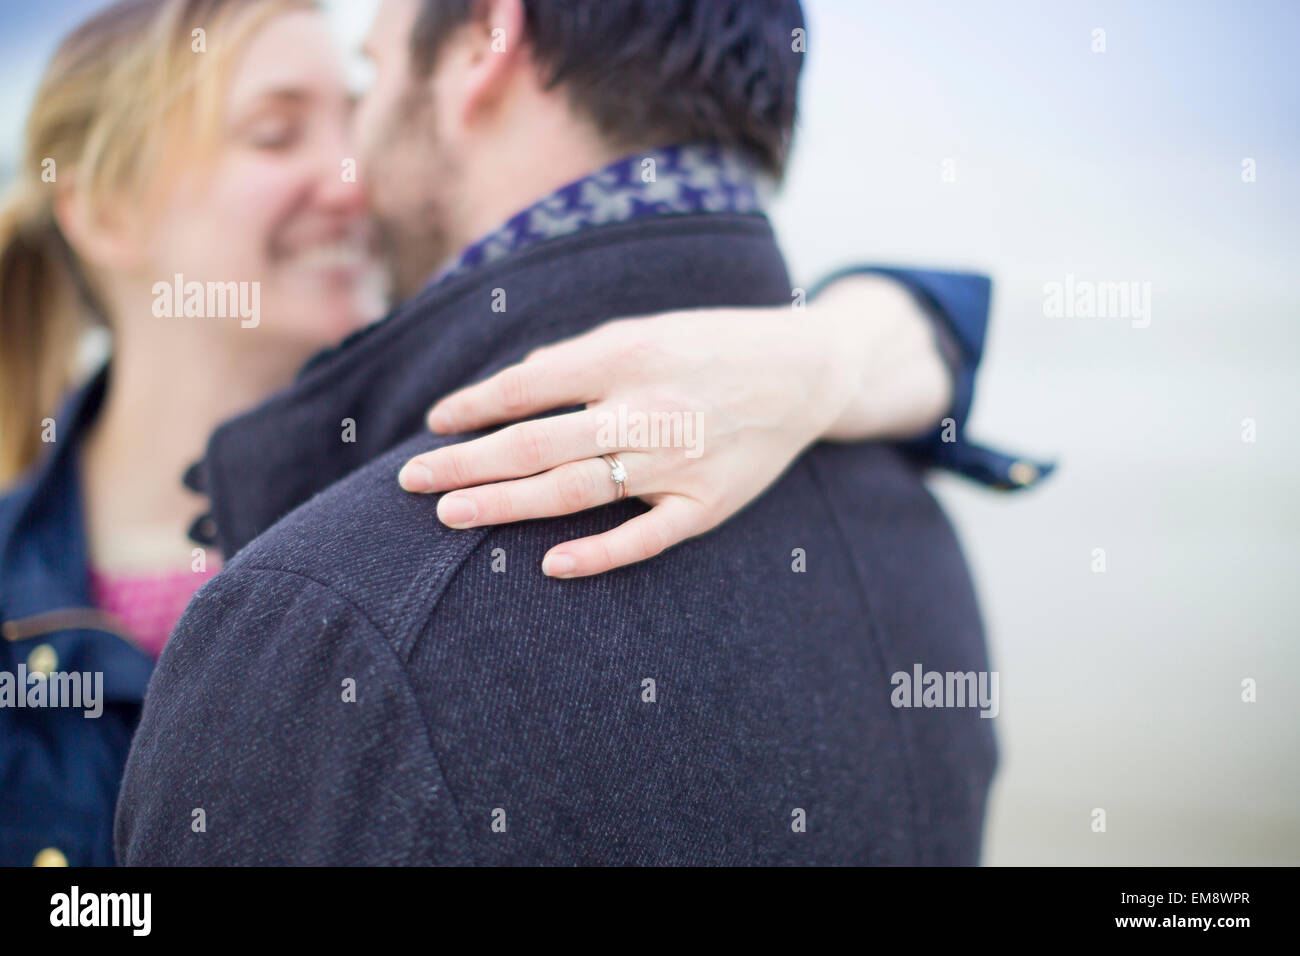 Couple on beach, embracing, woman's hand showing engagement ring Stock Photo